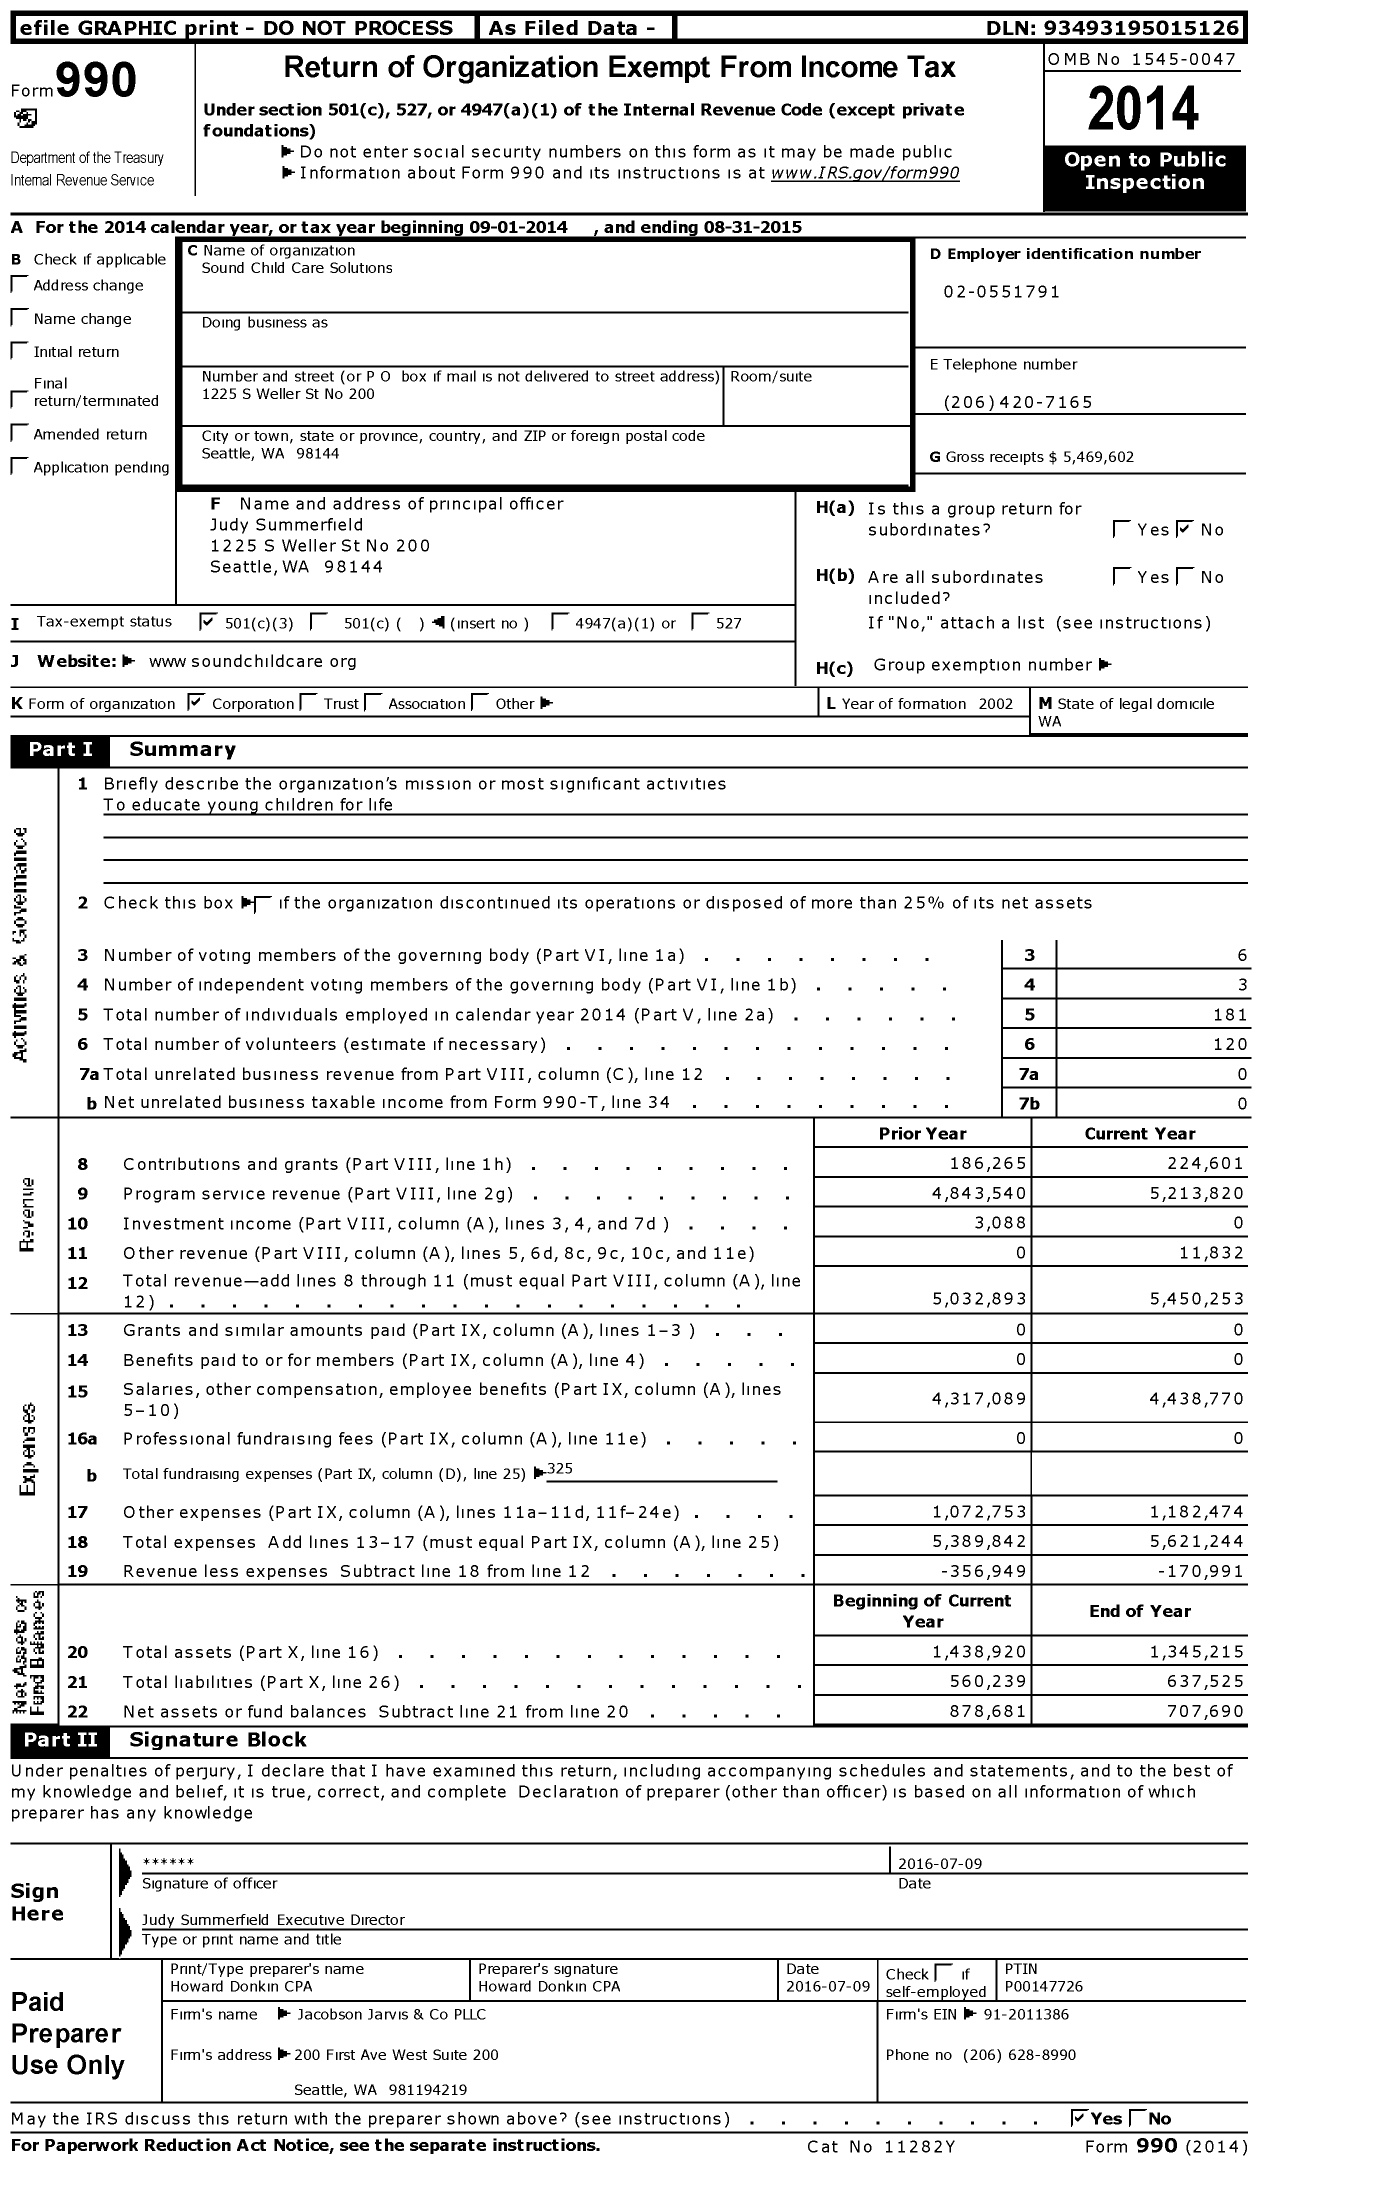 Image of first page of 2014 Form 990 for Sound Child Care Solutions